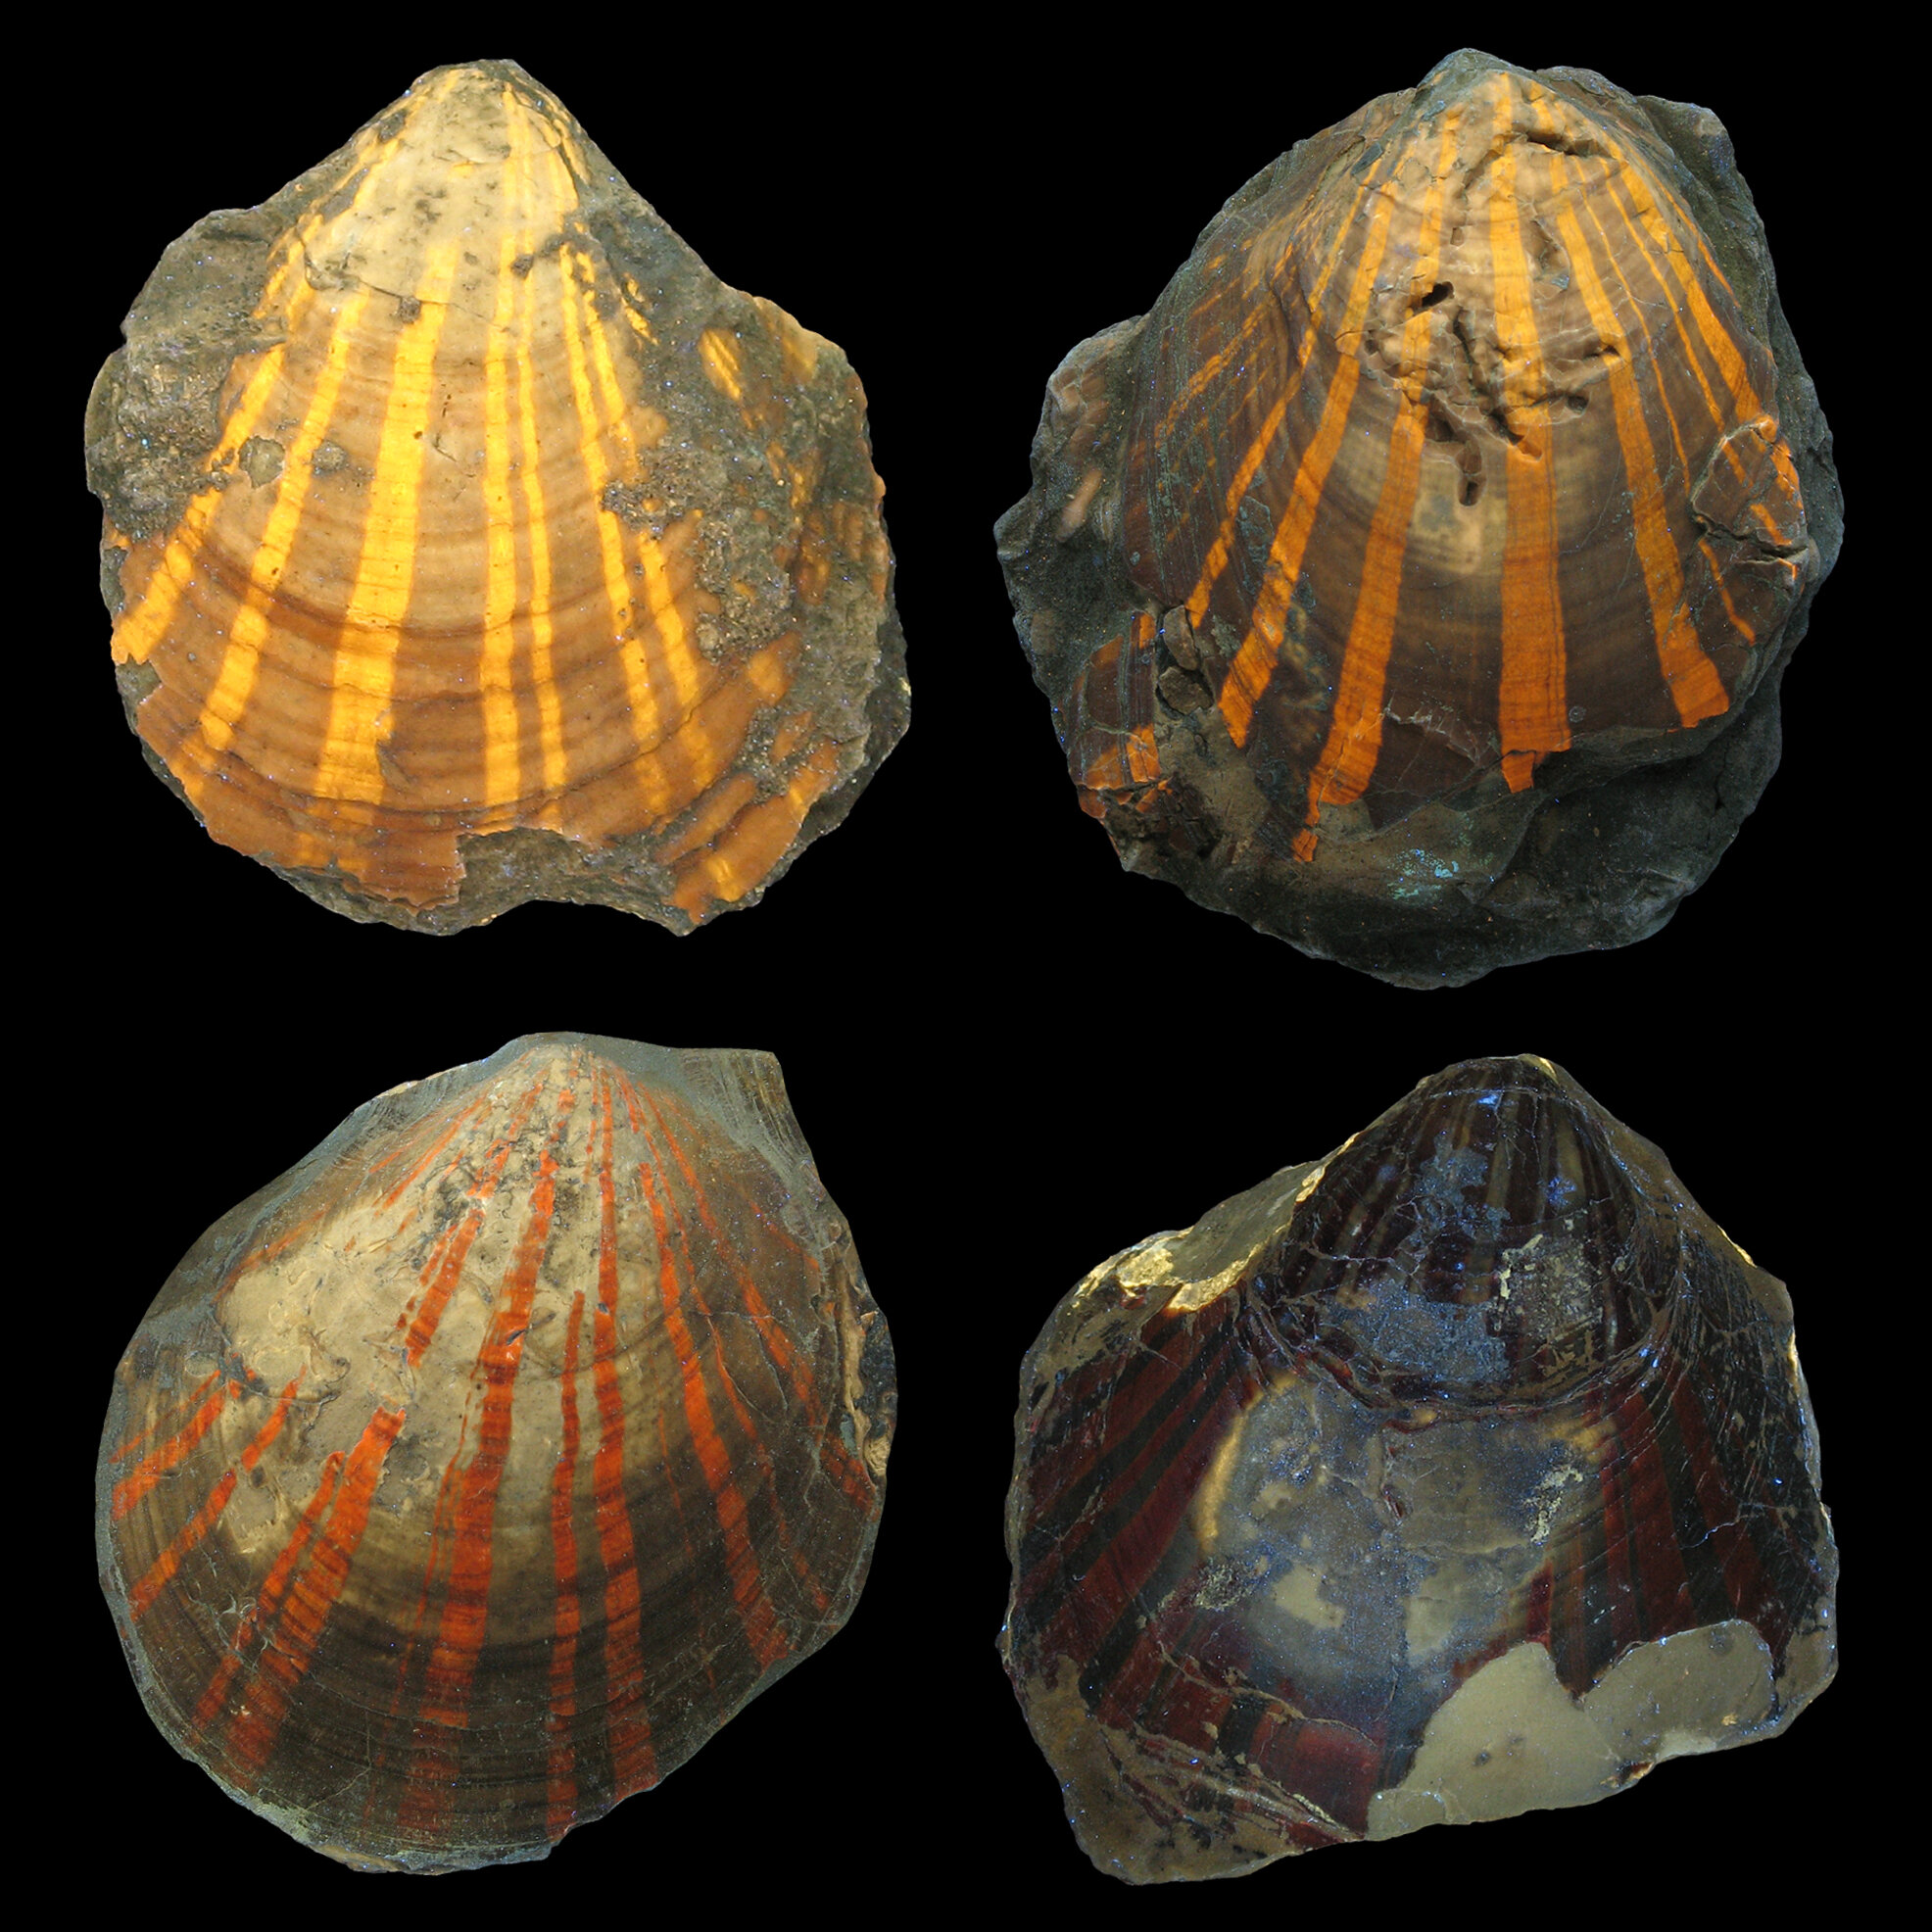 Glowing fossils: Fluorescence reveals color patterns of earliest scallops